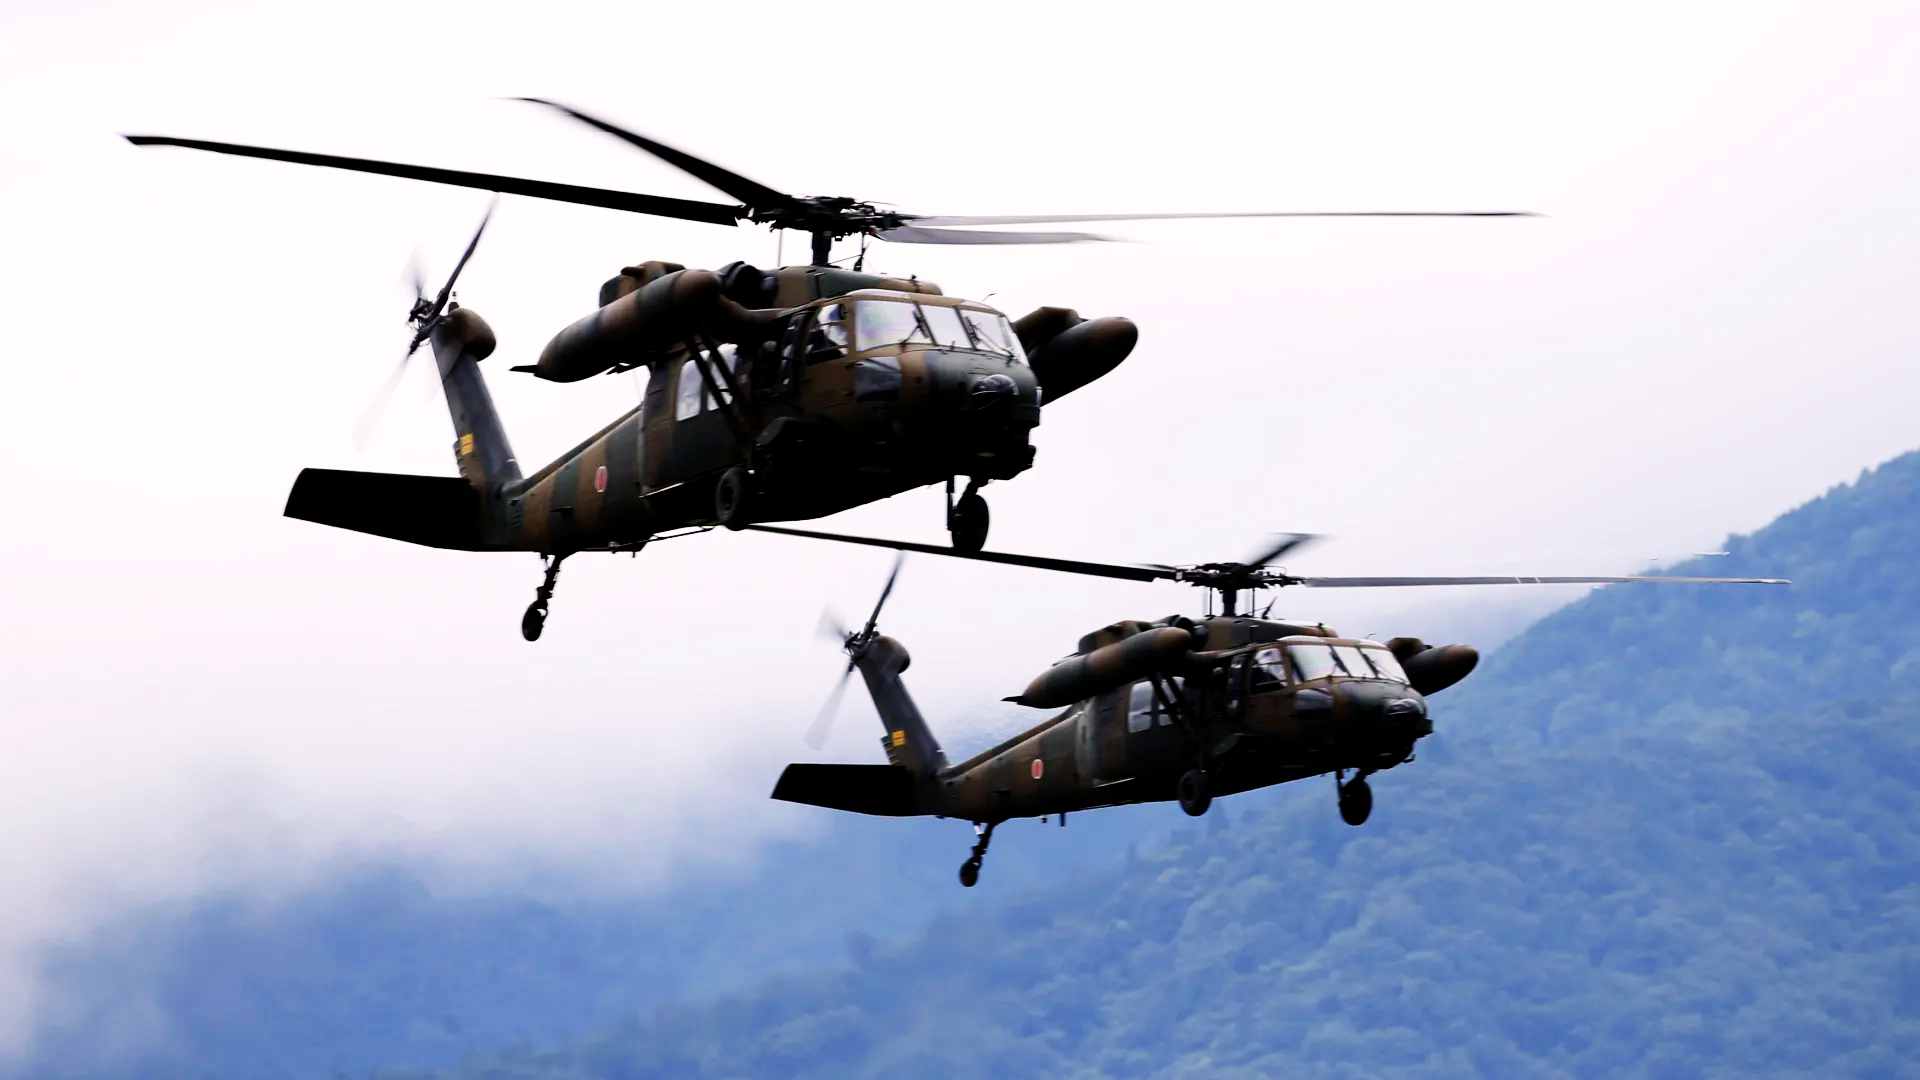 Report: 7 Crew Members Missing Following Crash Of 2 Japanese Military Helicopters